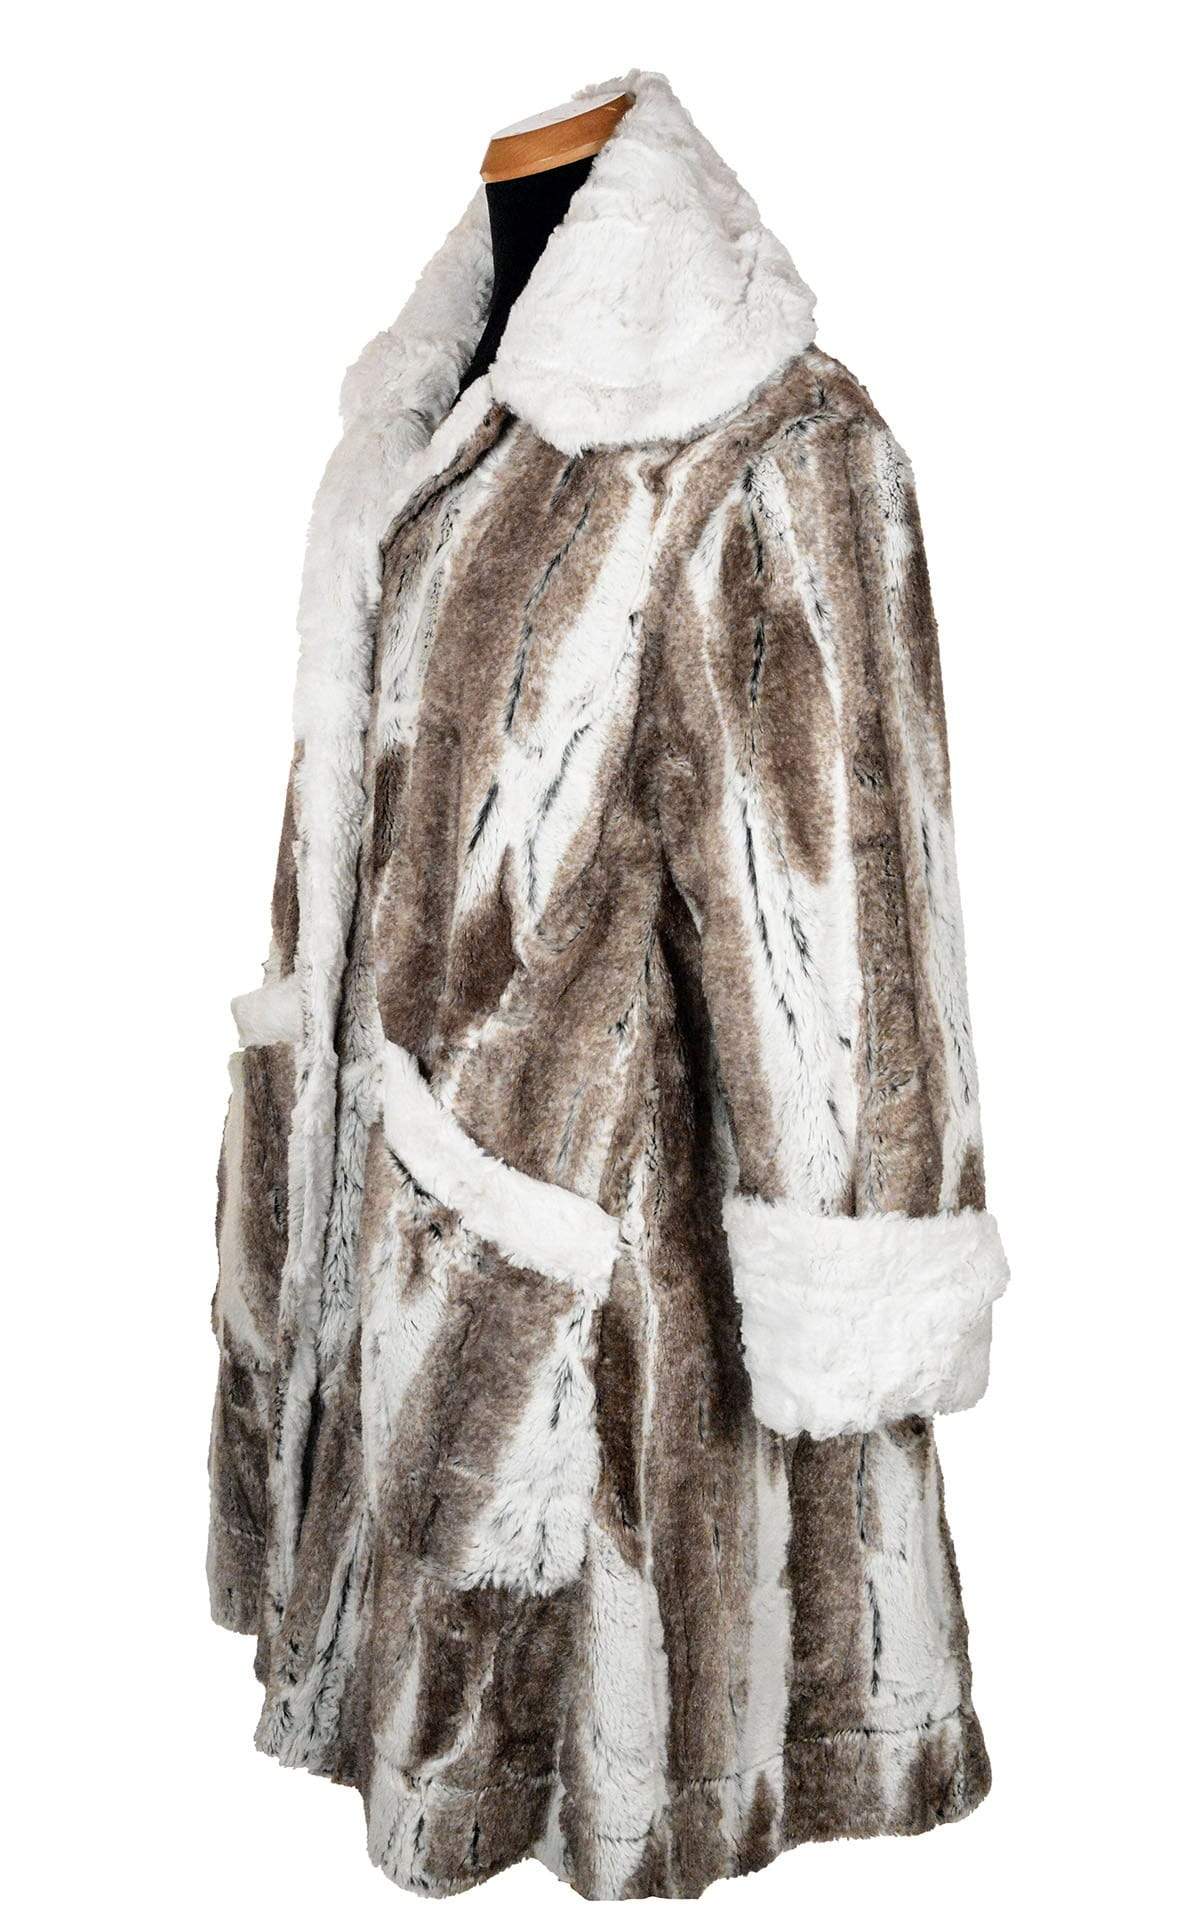 Garland Swing Coat - Luxury Faux Fur in Birch with Cuddly Fur in Ivory  - Sold Out!